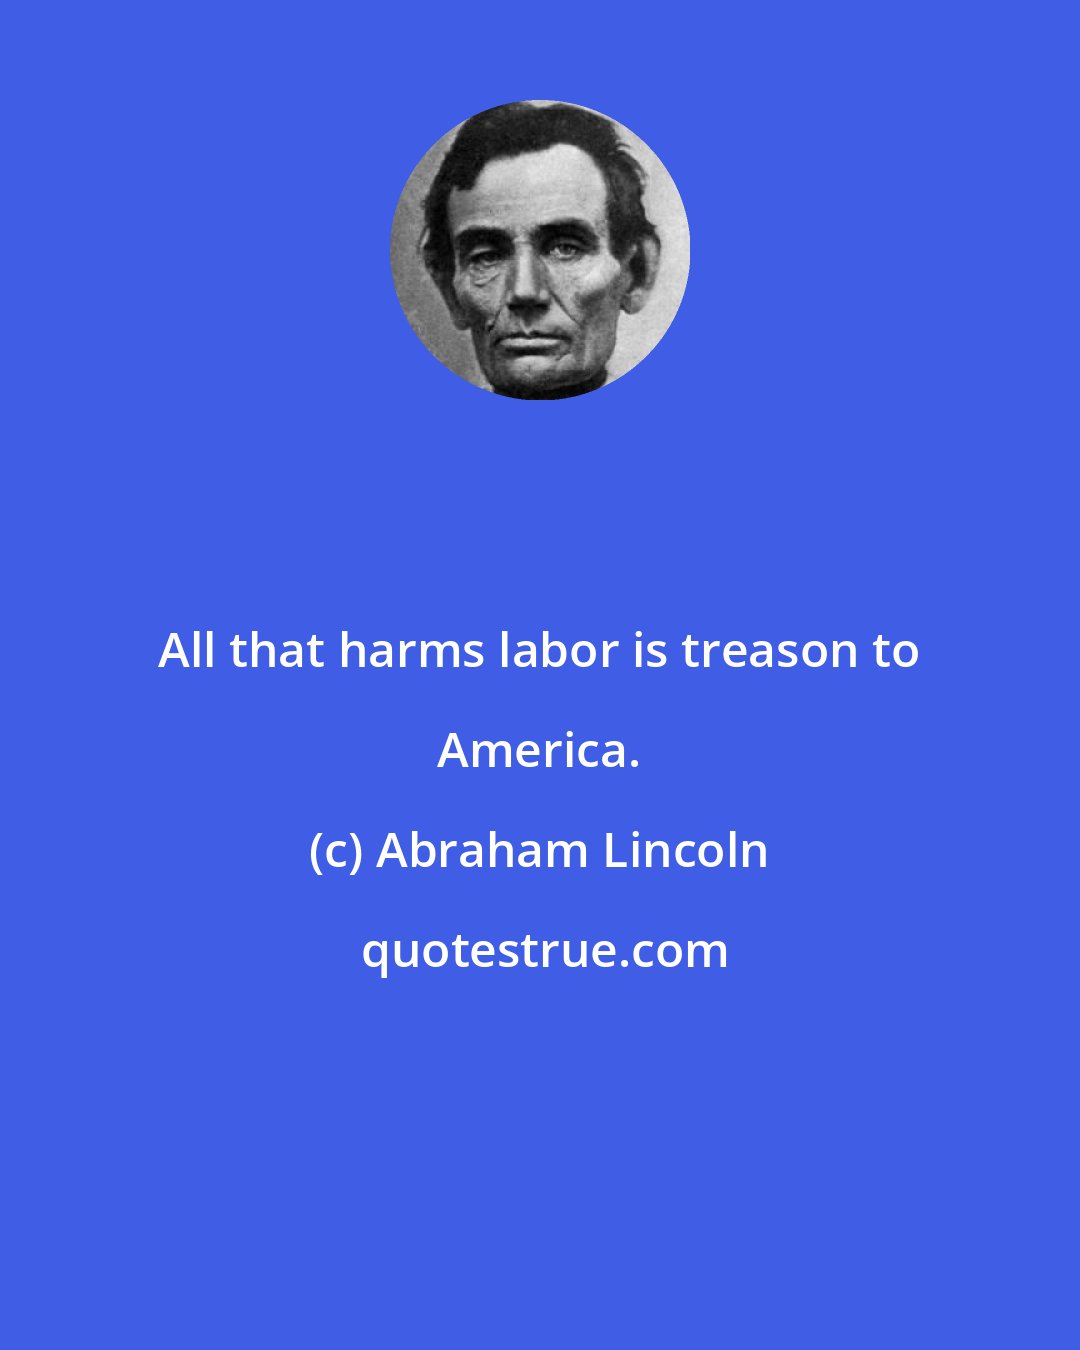 Abraham Lincoln: All that harms labor is treason to America.